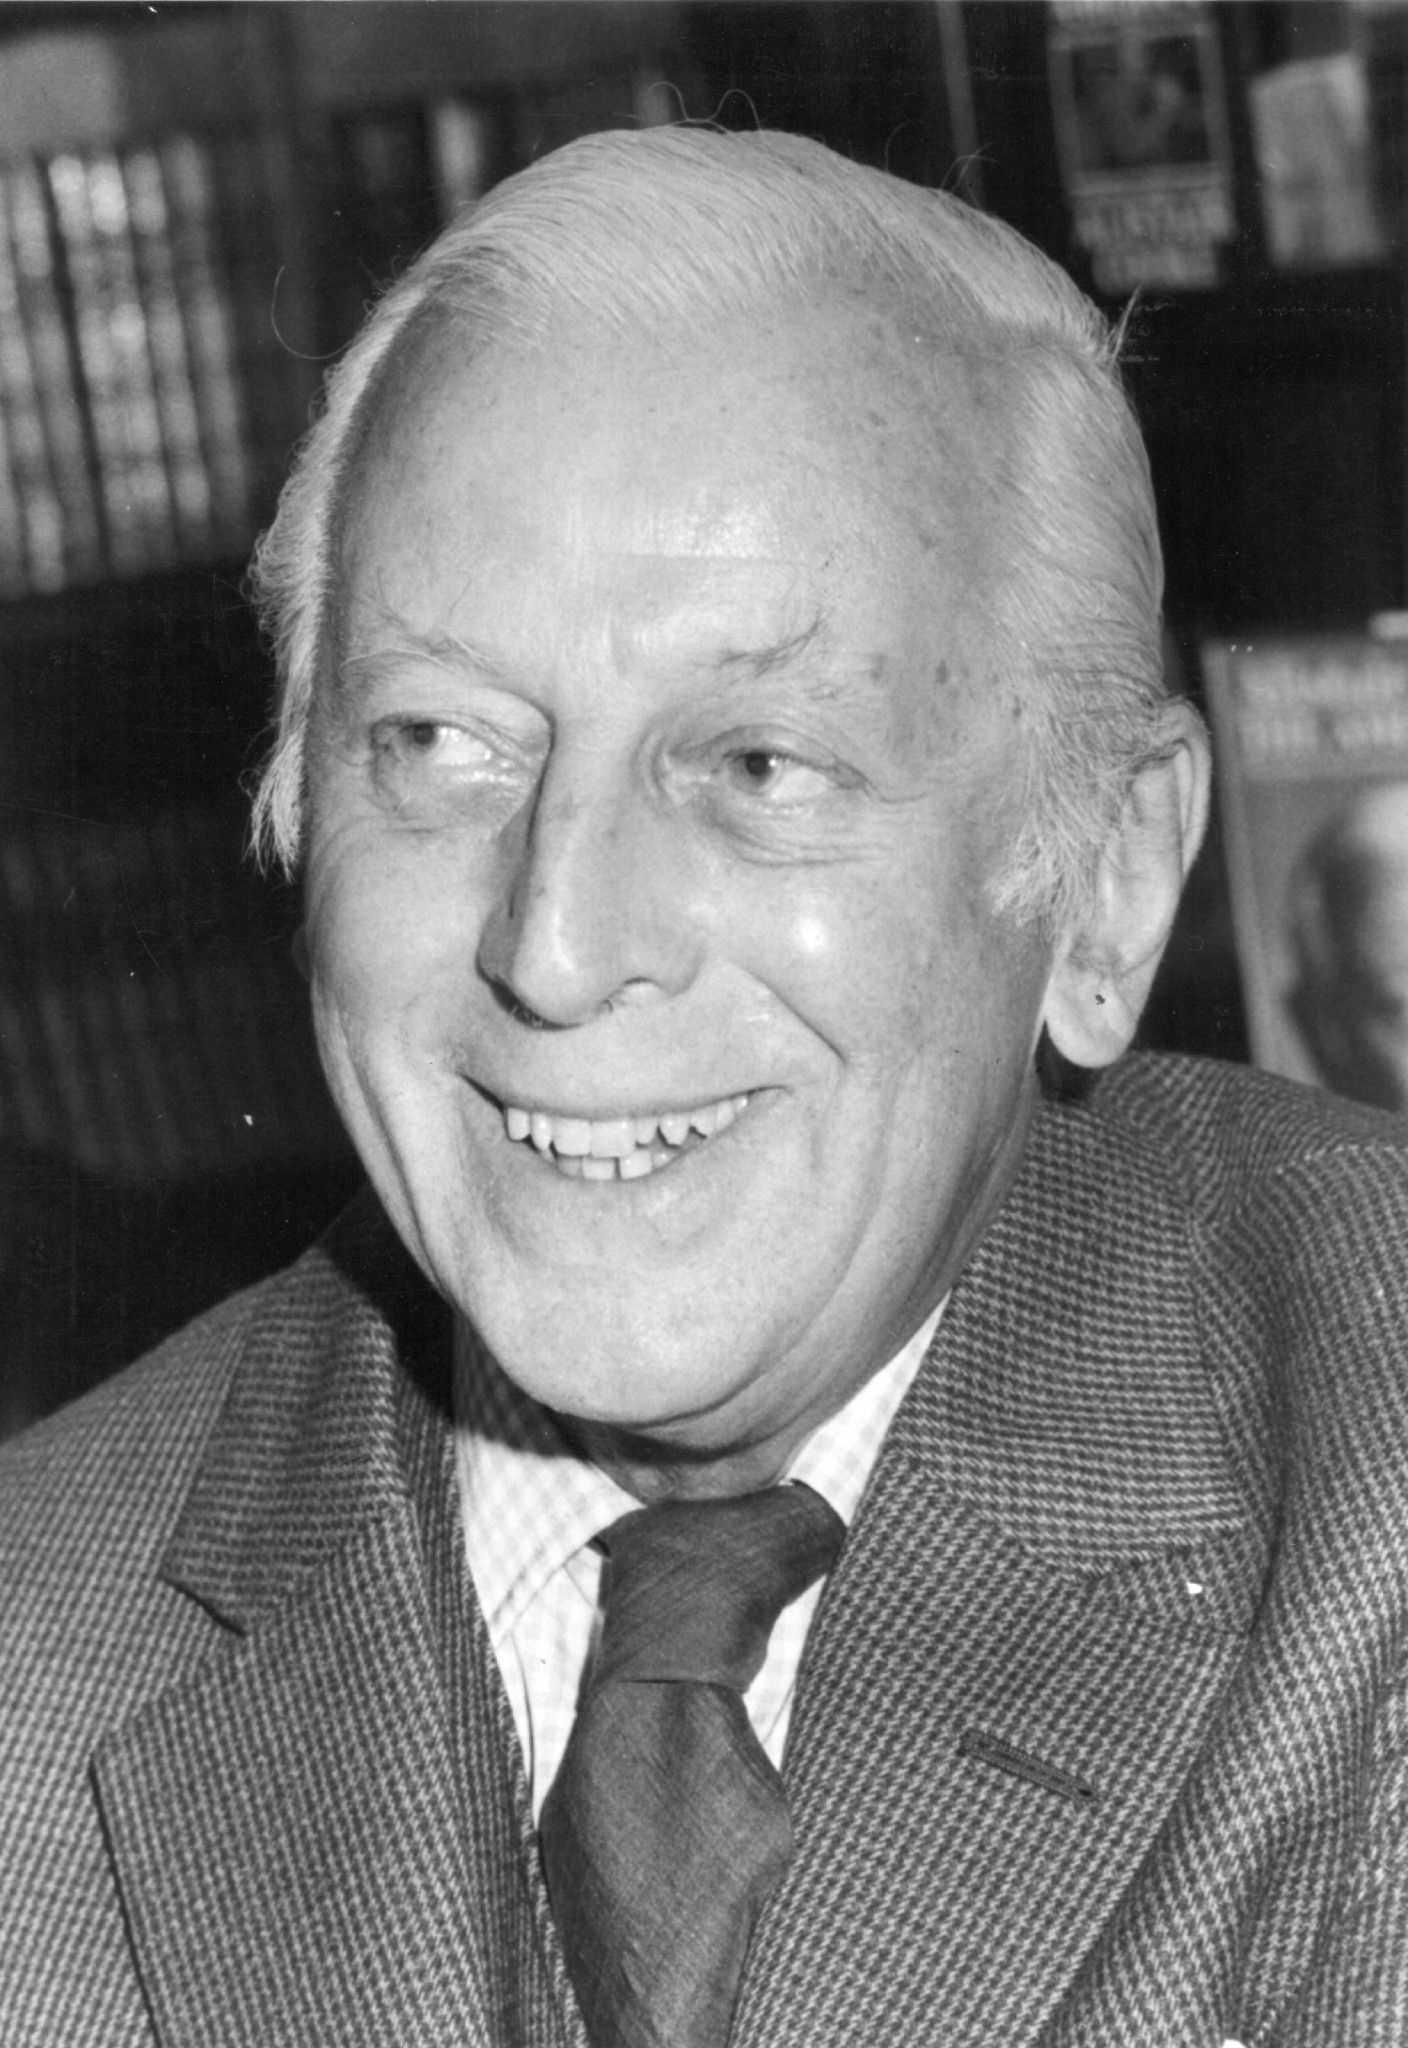 Alistair Cooke received an honorary knighthood in 1973 ©Getty Images